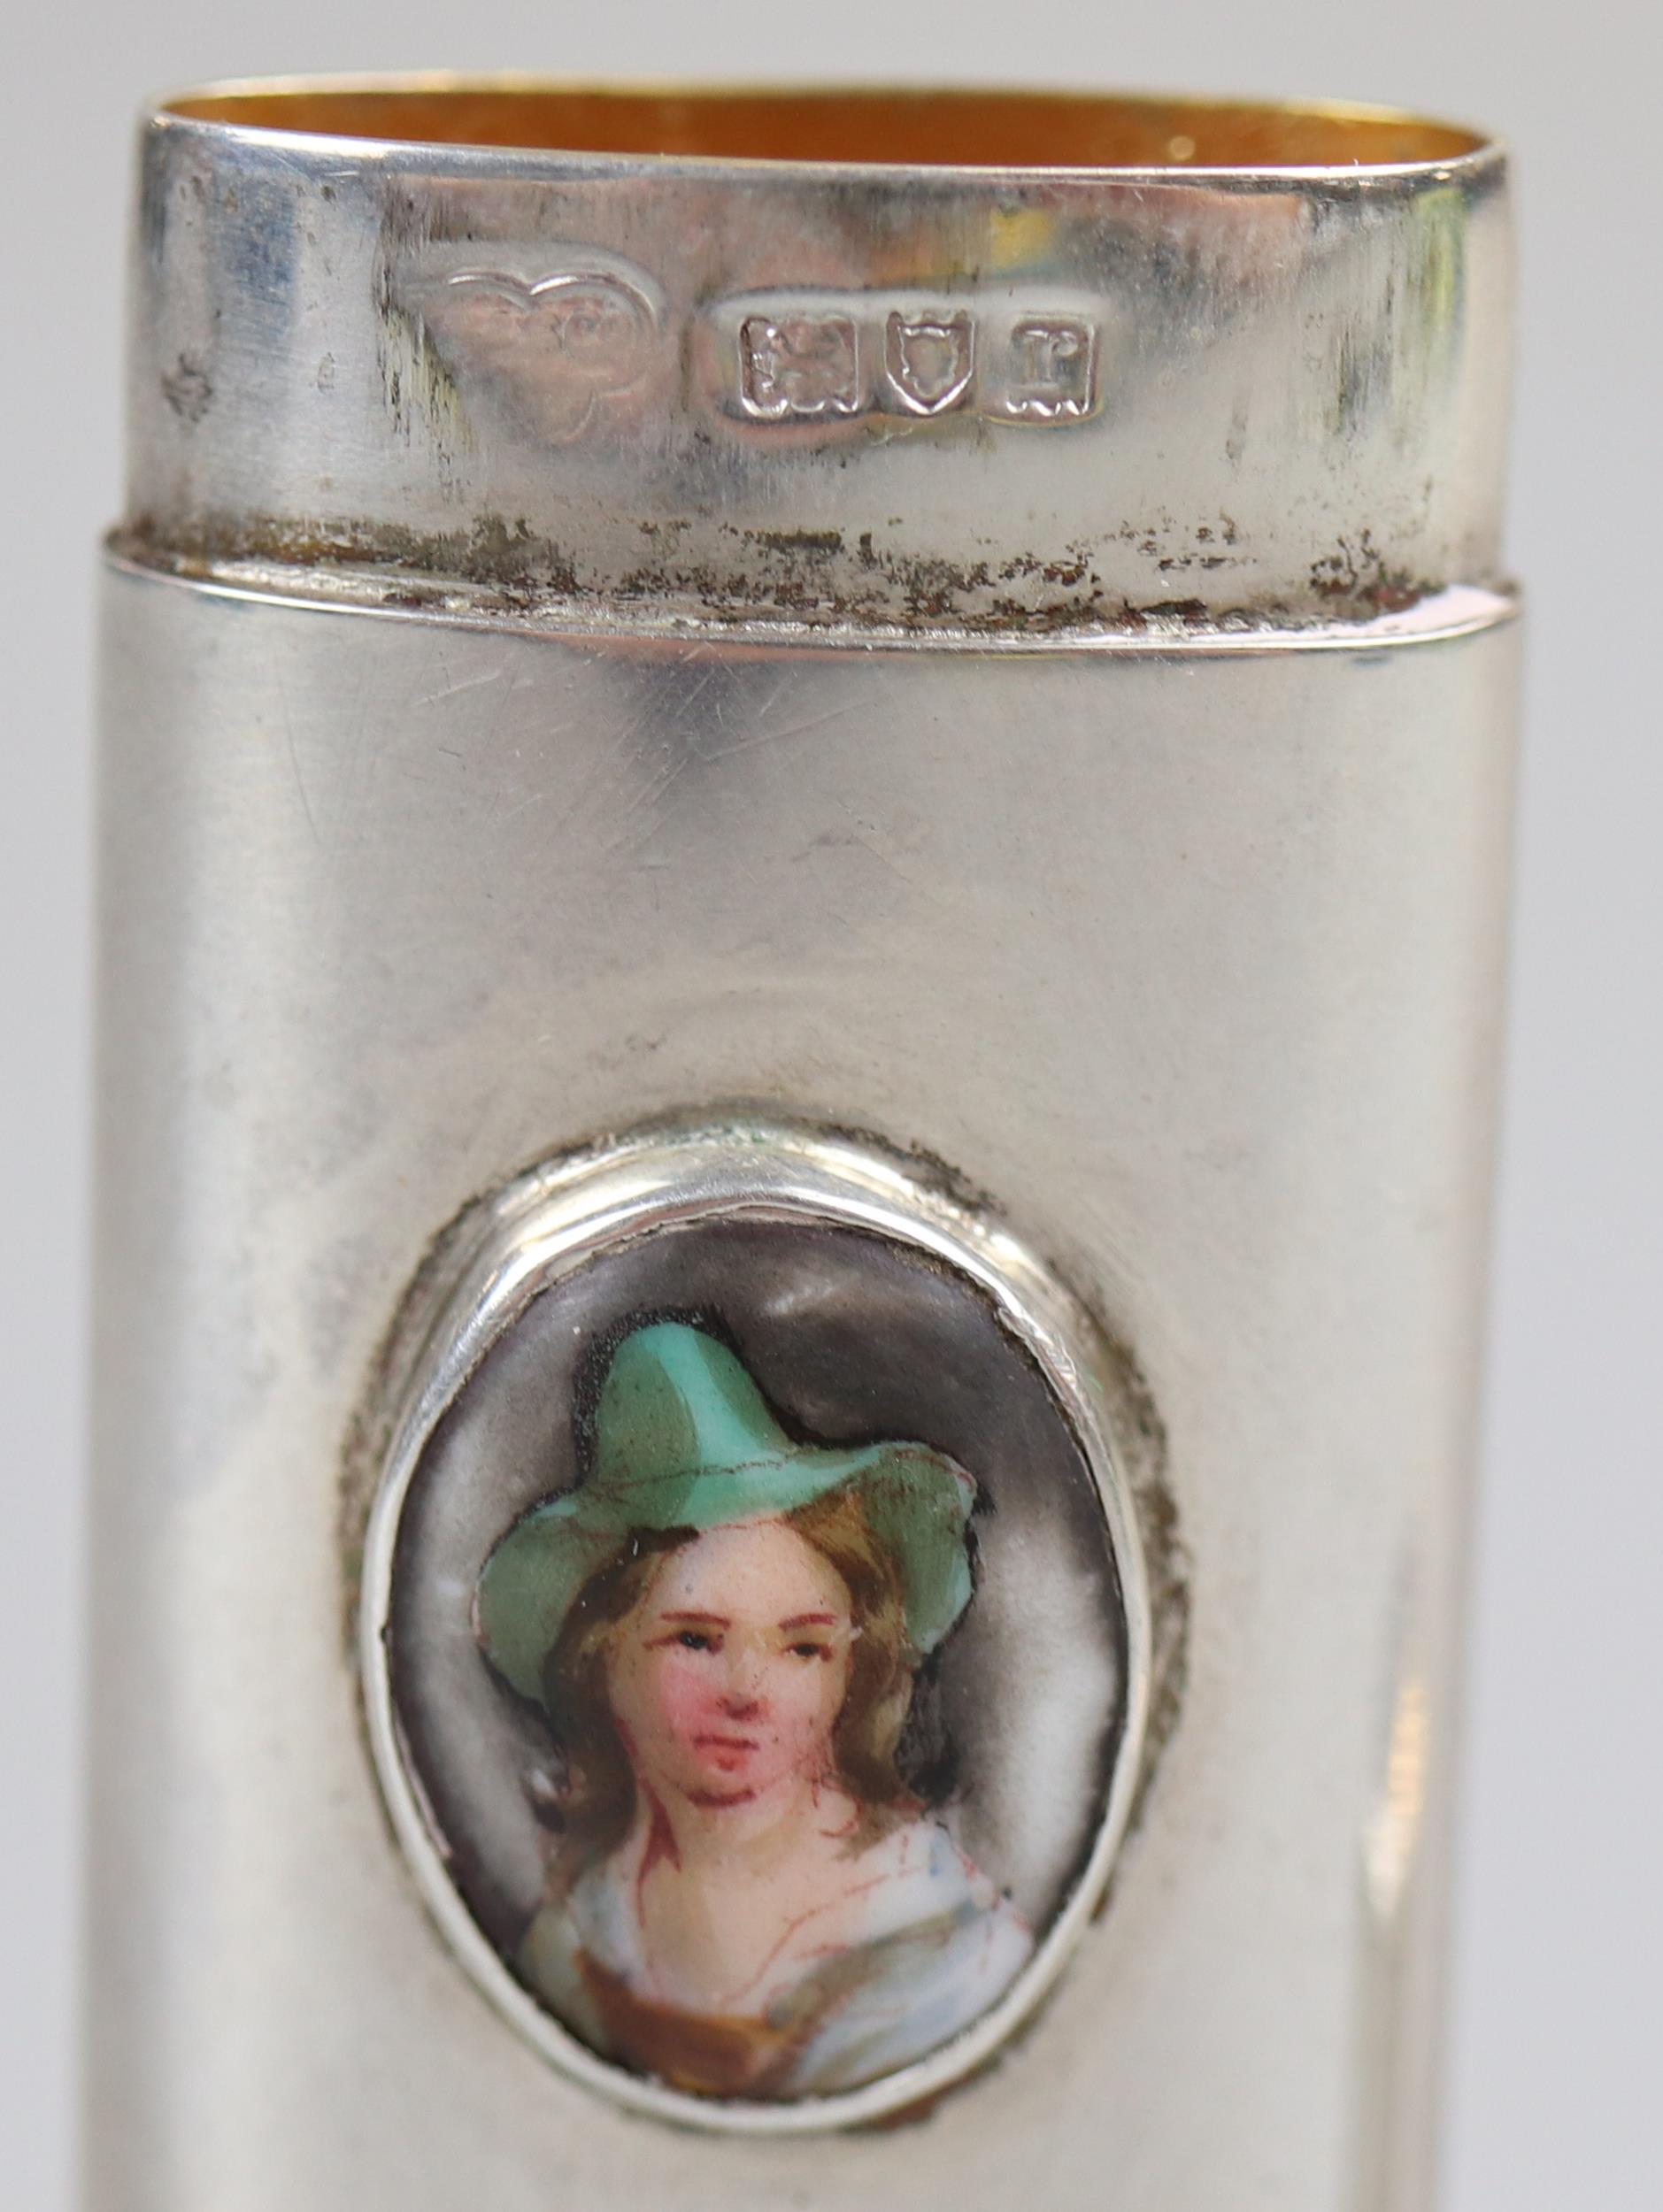 Hallmarked silver pin case with enamel portrait of lady - Makers mark G&S Co LTD - Image 3 of 3